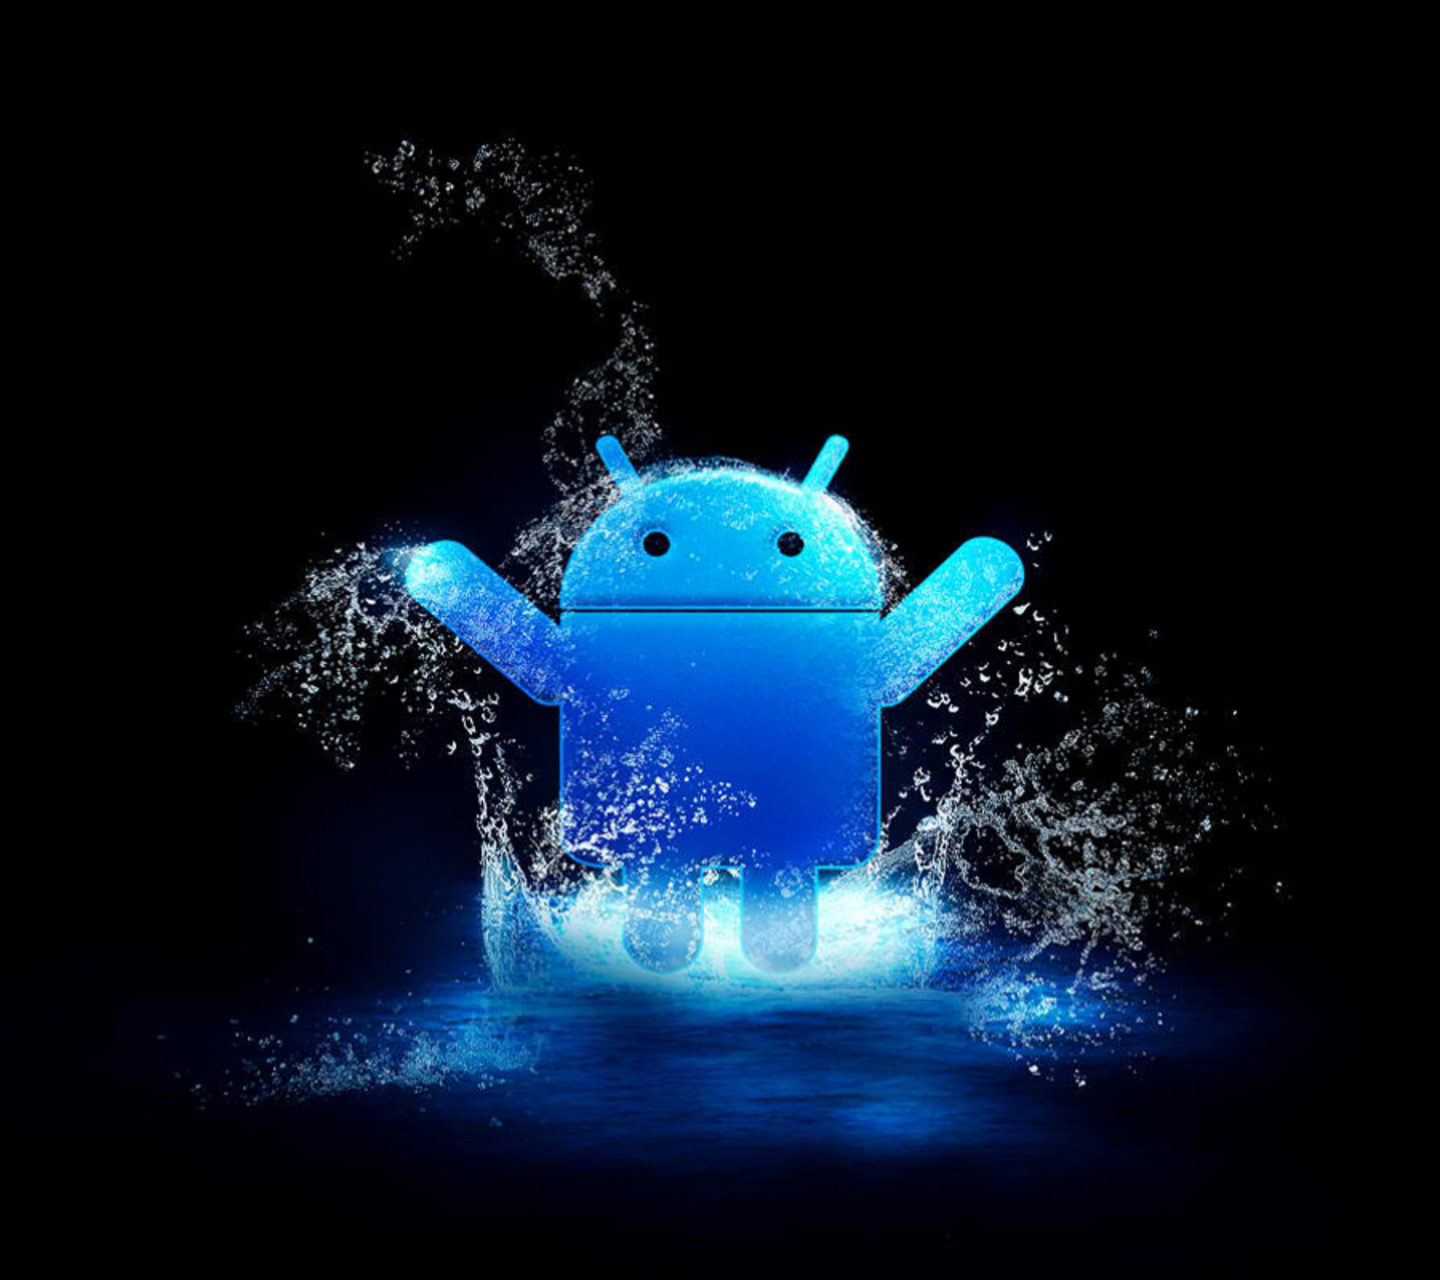 ... Android+Backgrounds_My-Galaxy-S3-Wallpaper-+Background-HD-Android.jpg